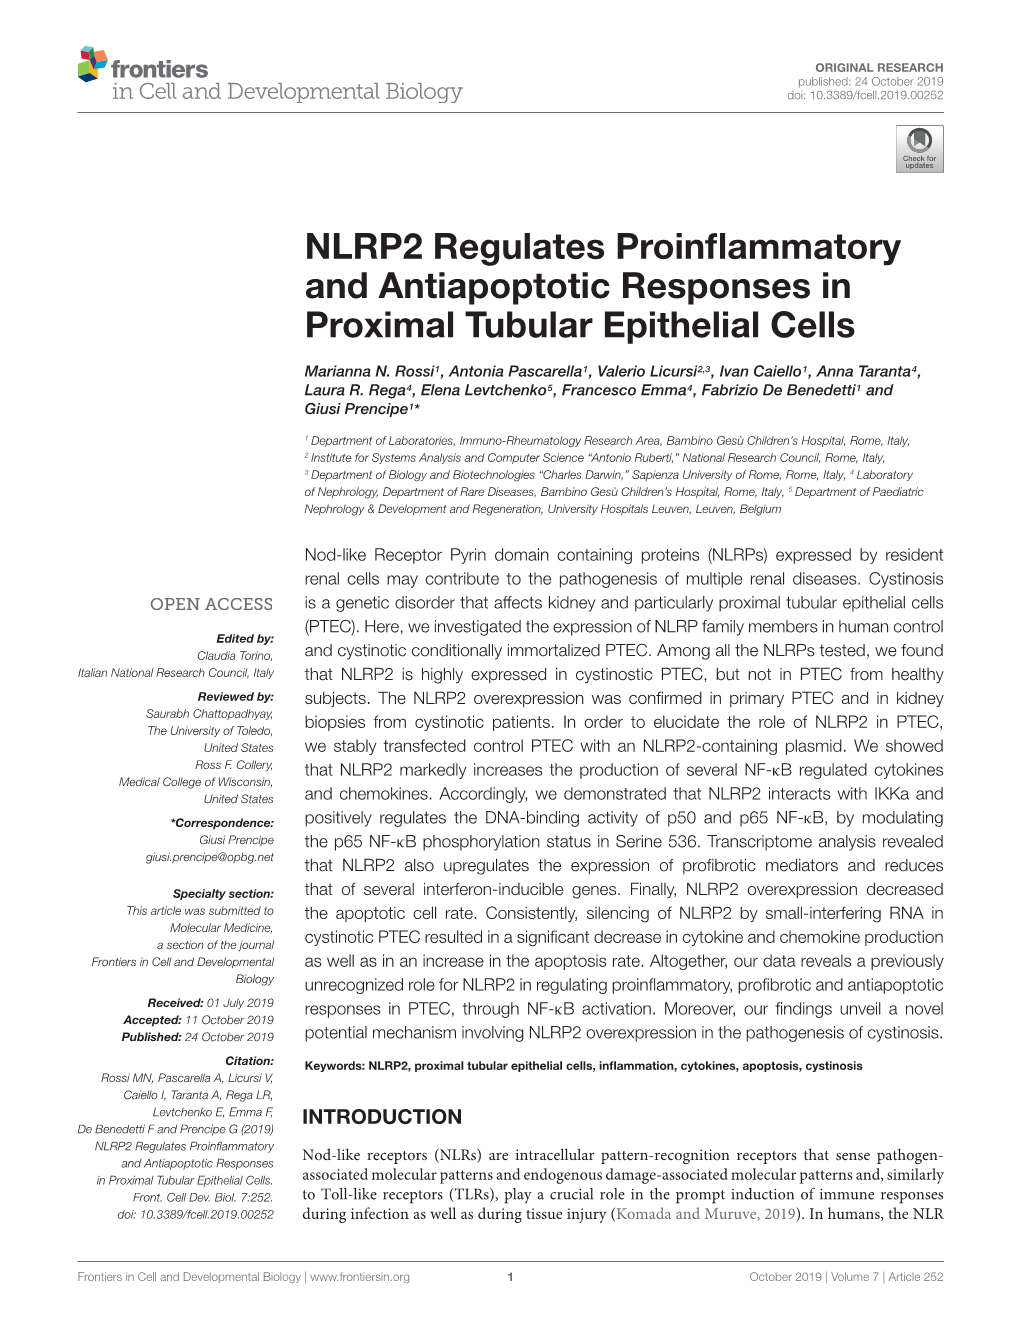 NLRP2 Regulates Proinflammatory and Antiapoptotic Responses In